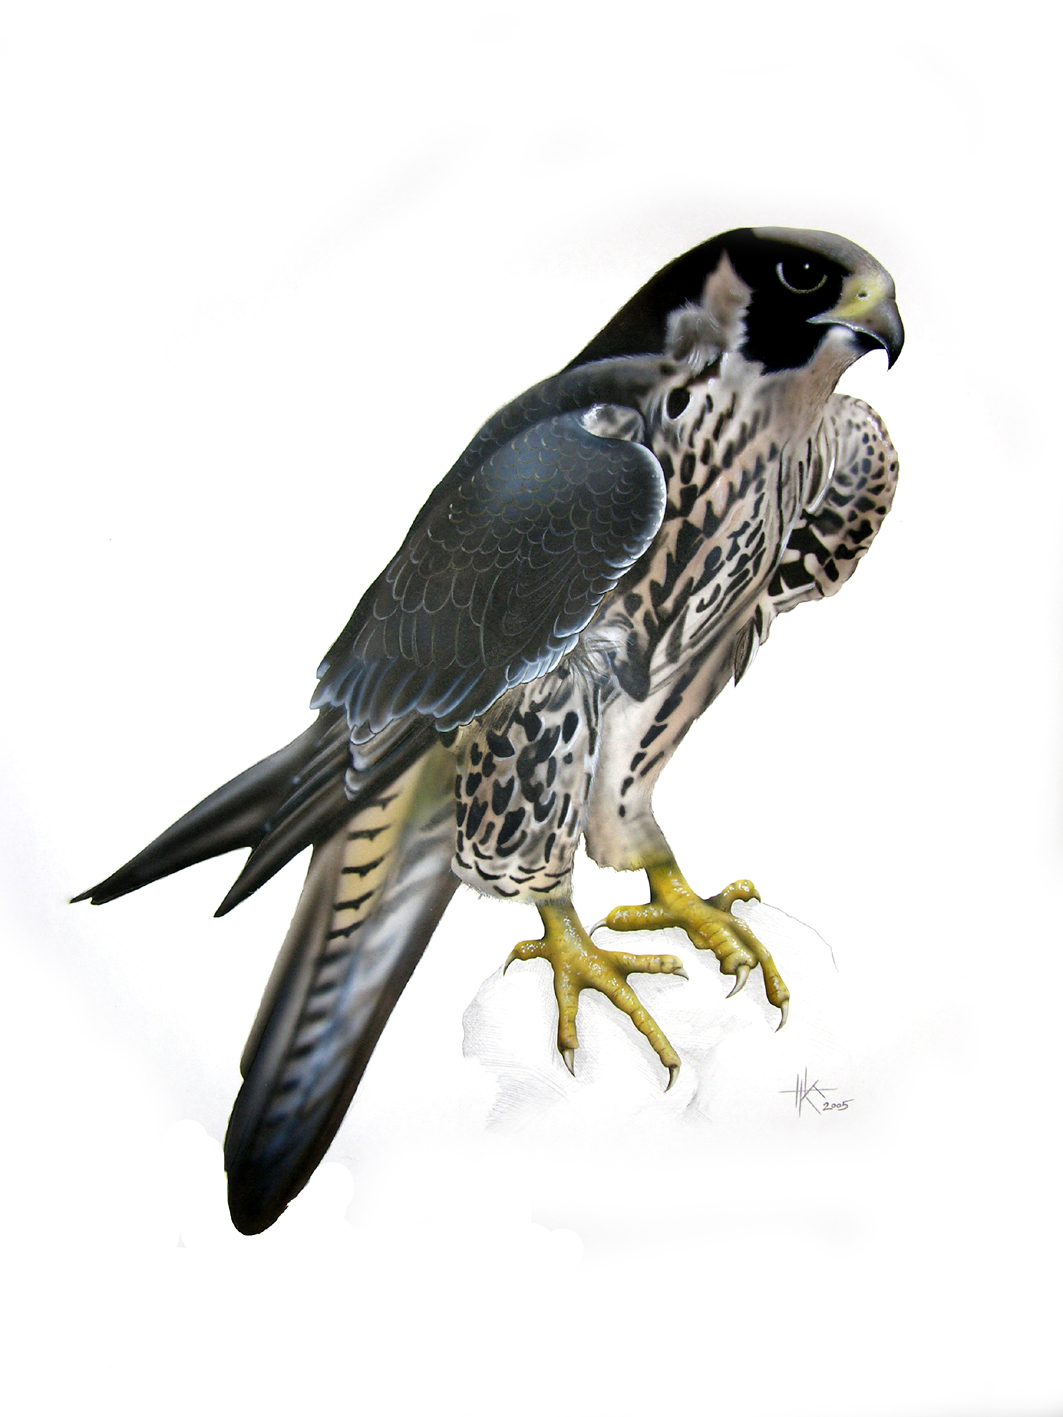 [AA06.2   Falco peregrino.JPG] - Click here to view the image in full size.